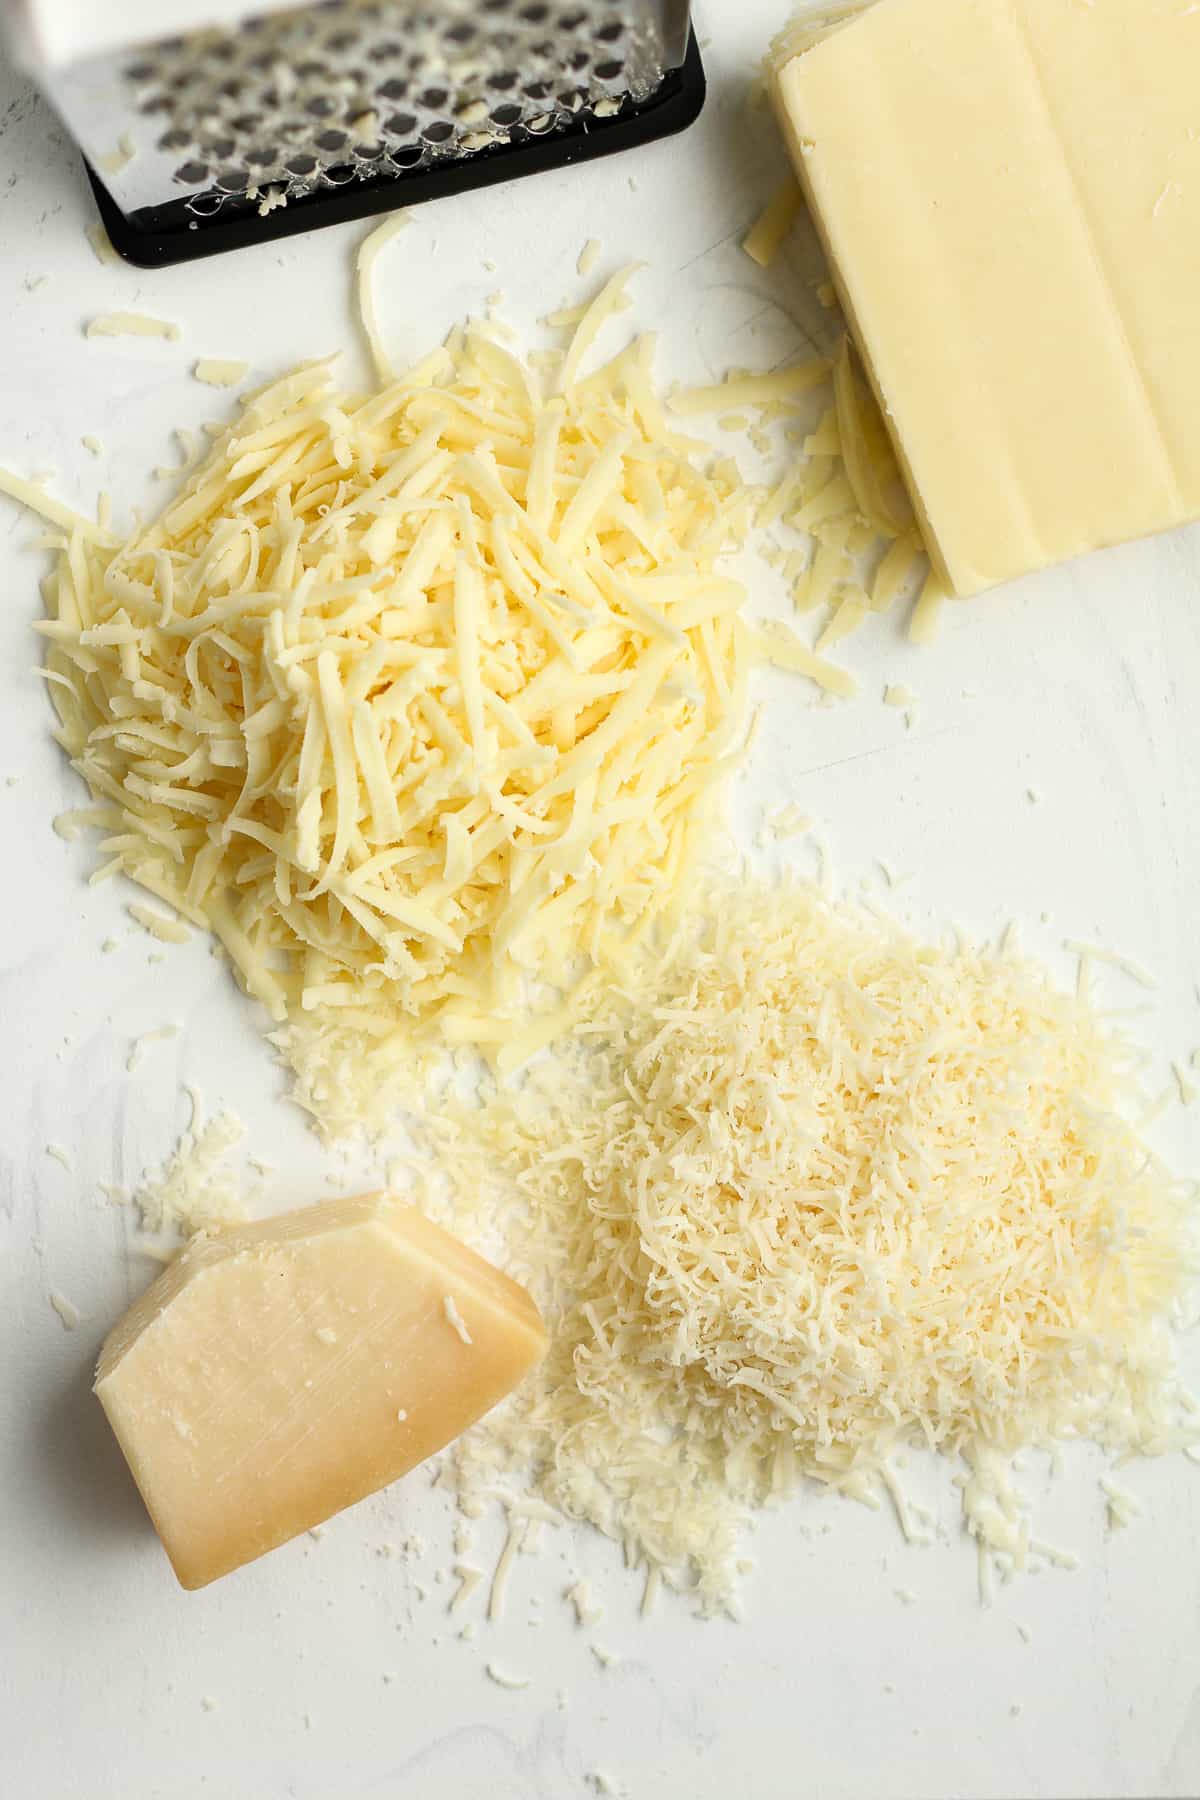 A cutting board of the shredded mozzarella cheese and the shredded parmesan cheese.